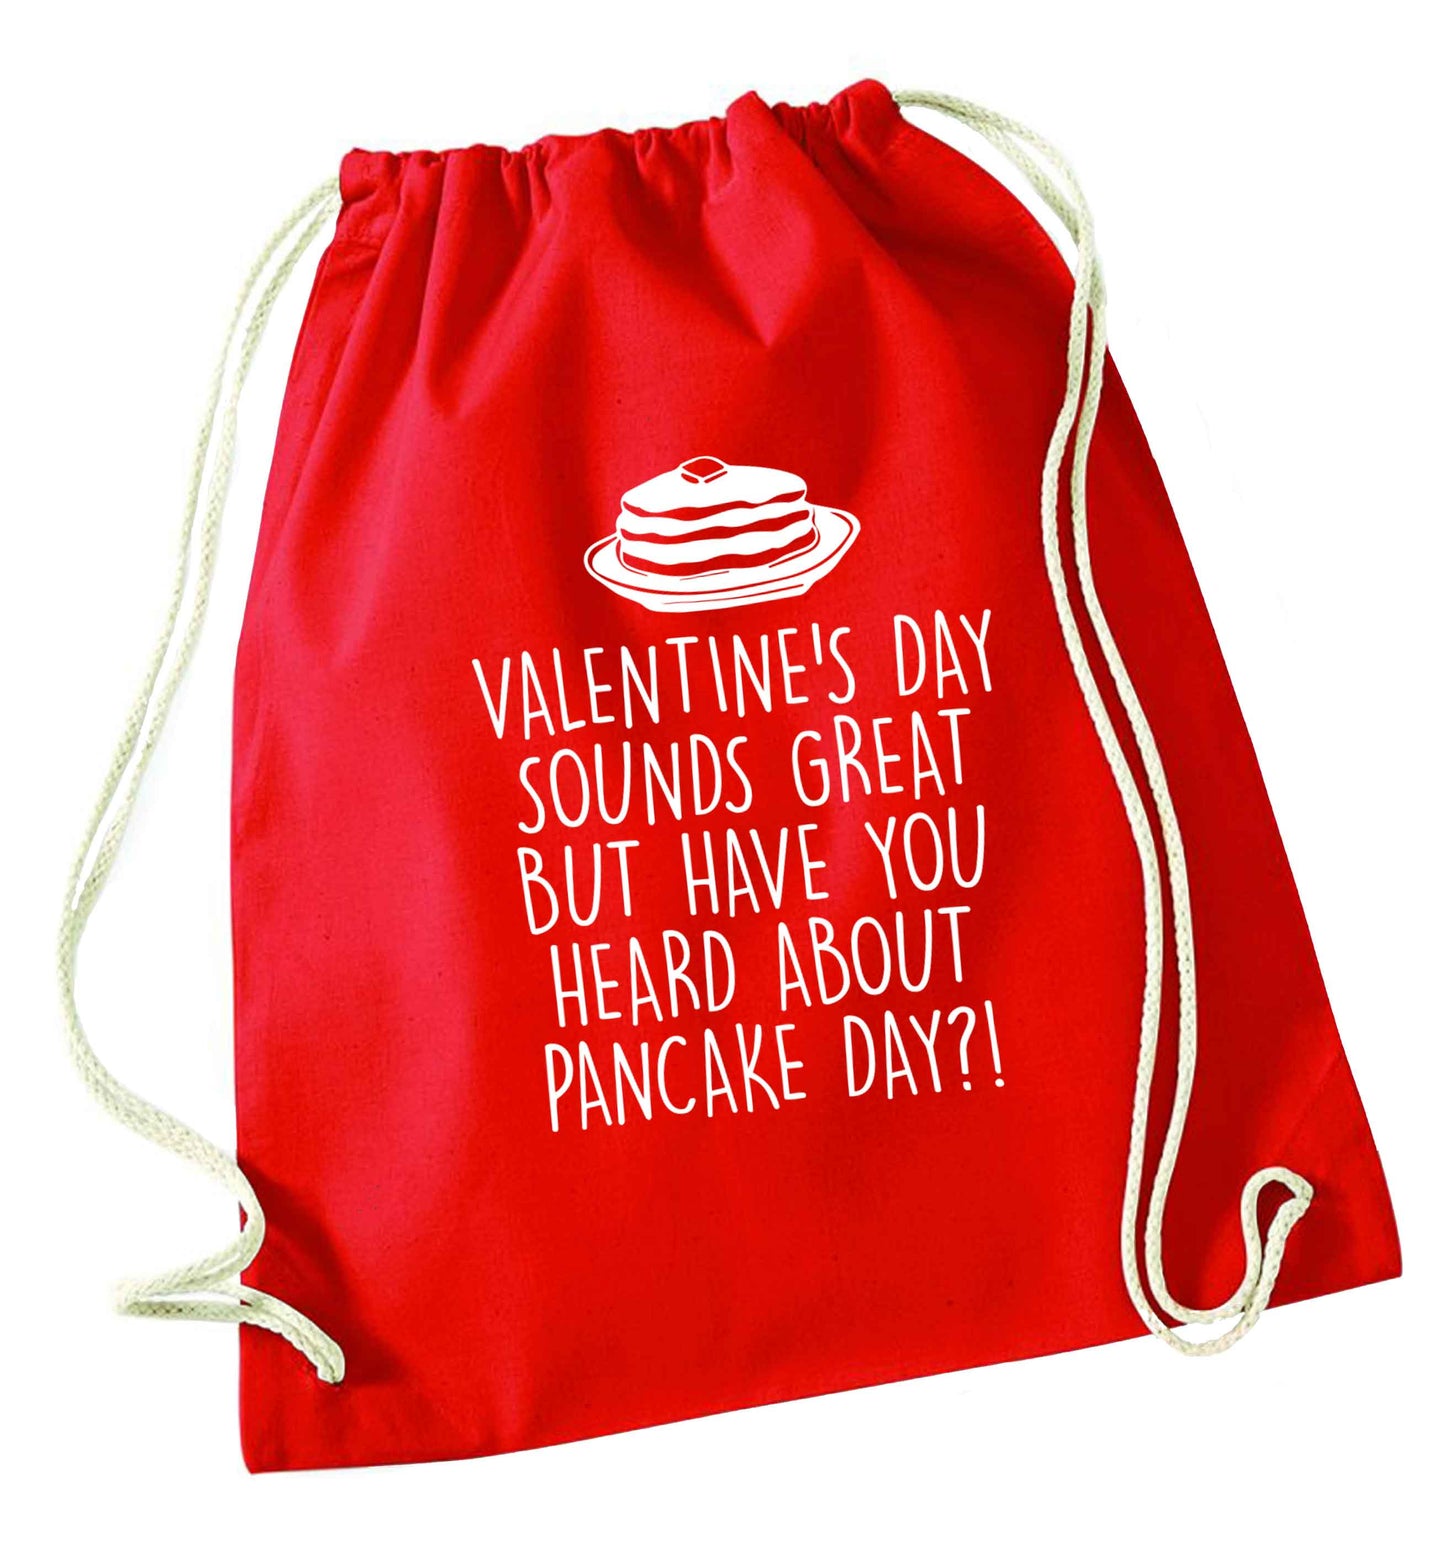 Valentine's day sounds great but have you heard about pancake day?! red drawstring bag 